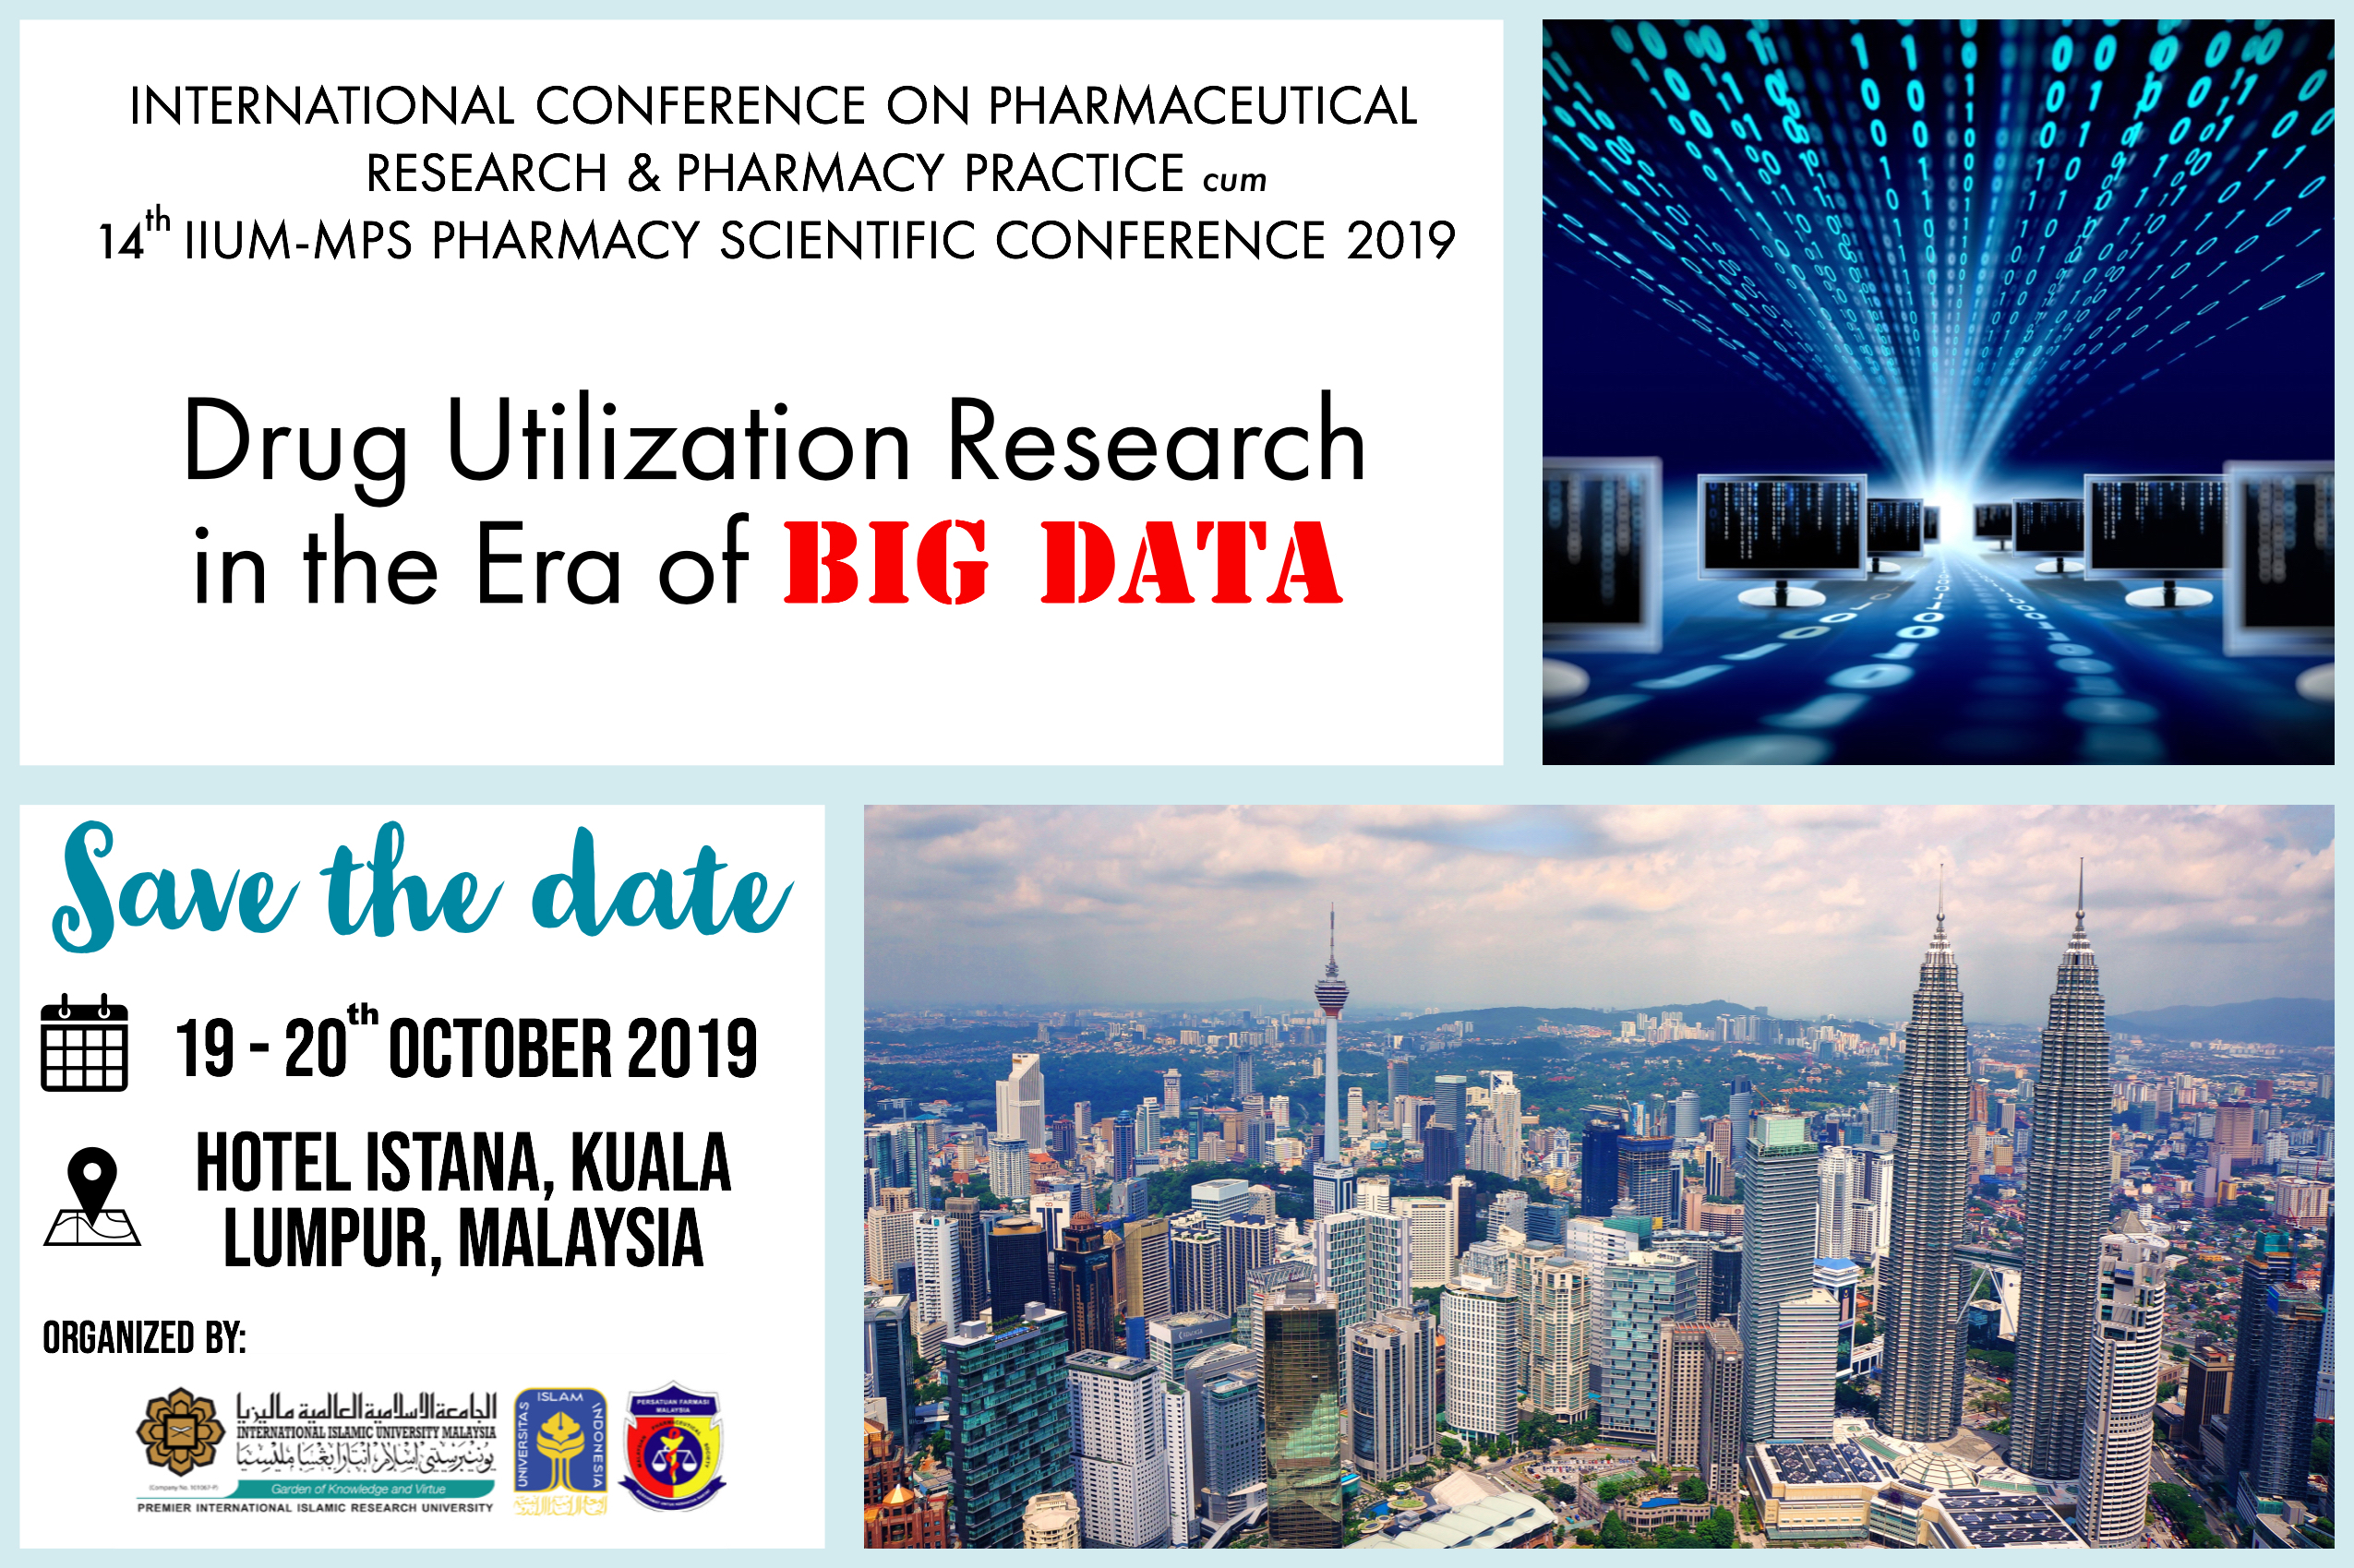 The International Conference on Pharmaceutical Research and Pharmacy Practice (ICPRP2019)